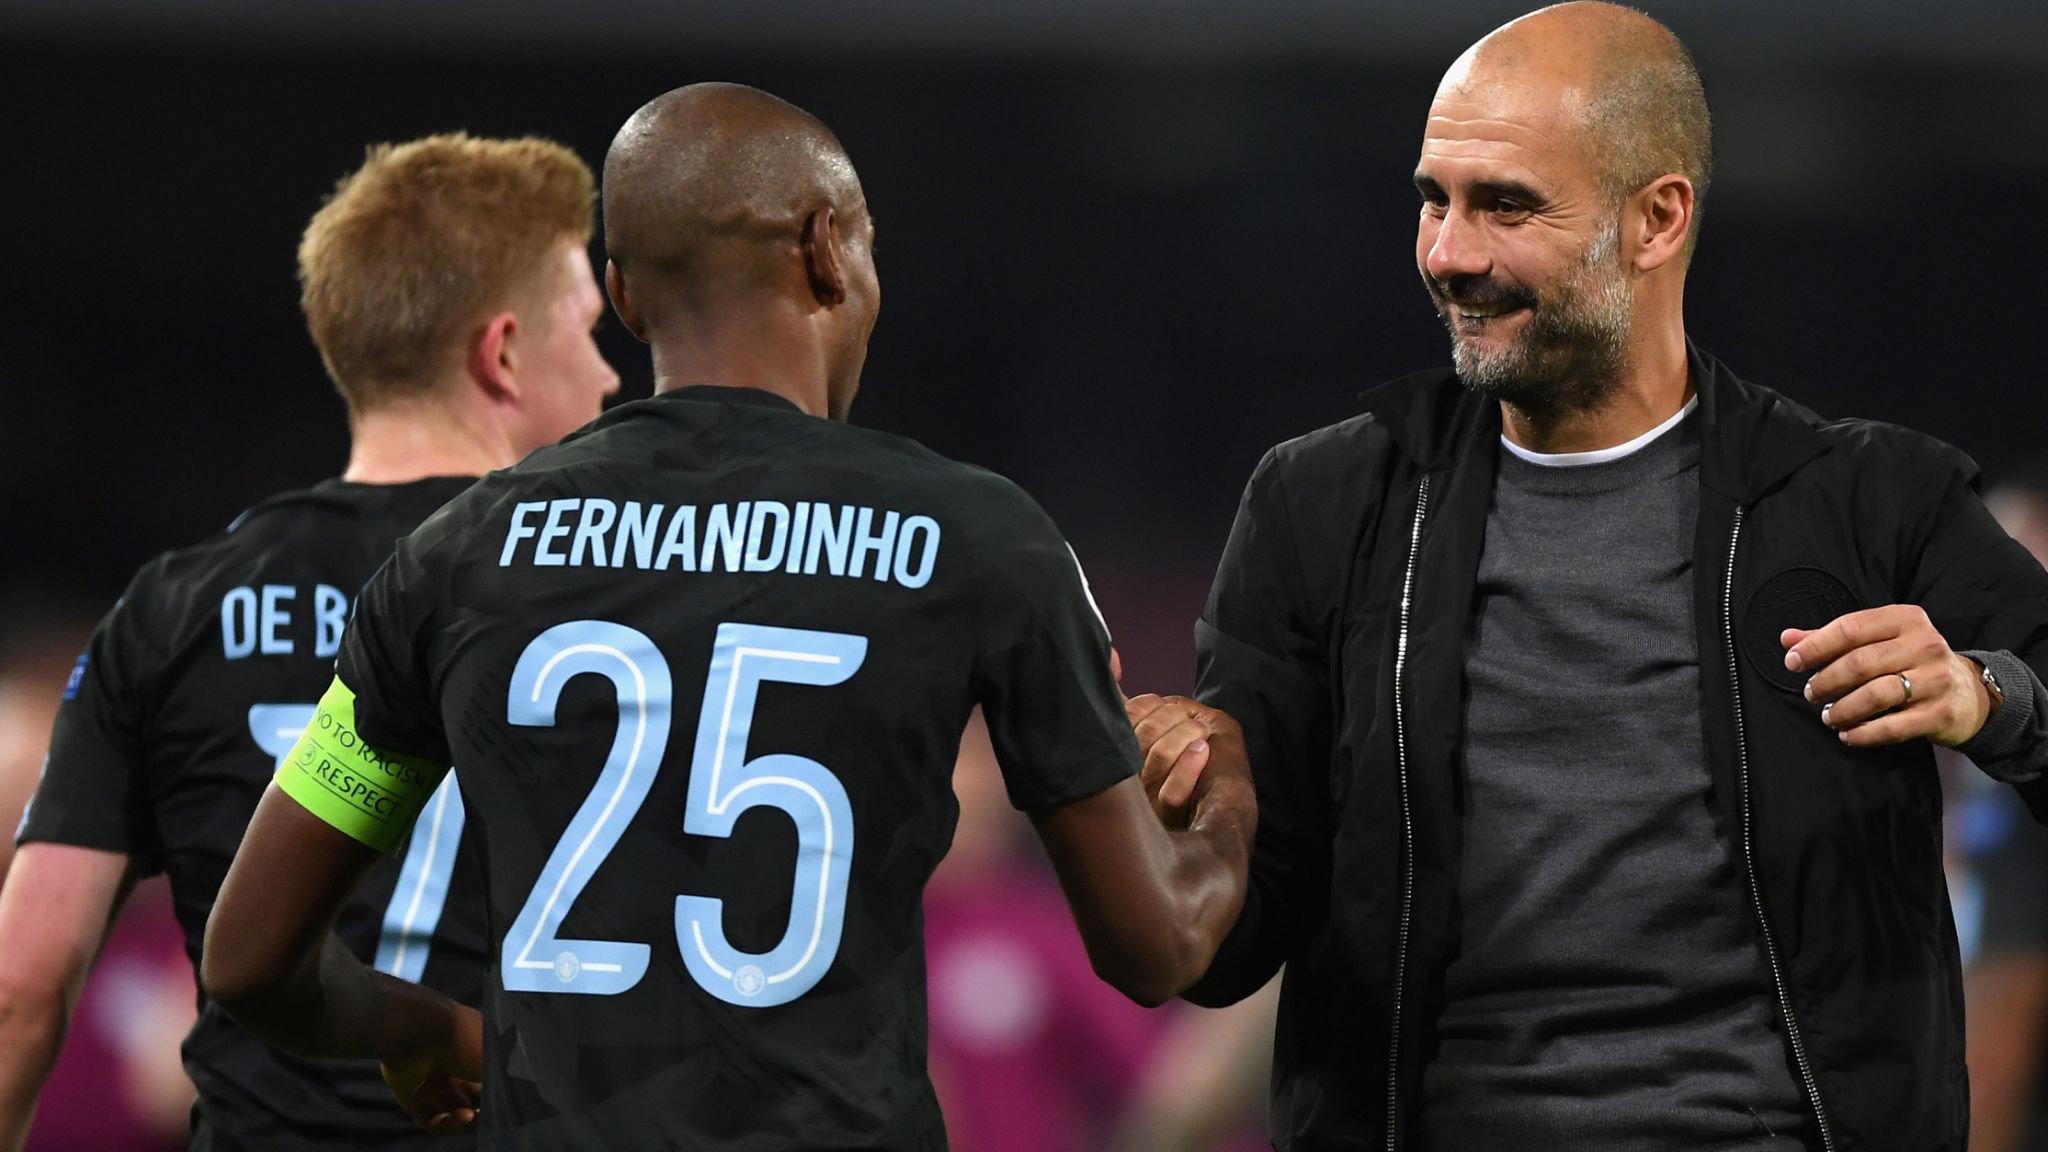 Fernandinho says Manchester City's players have bought into Pep